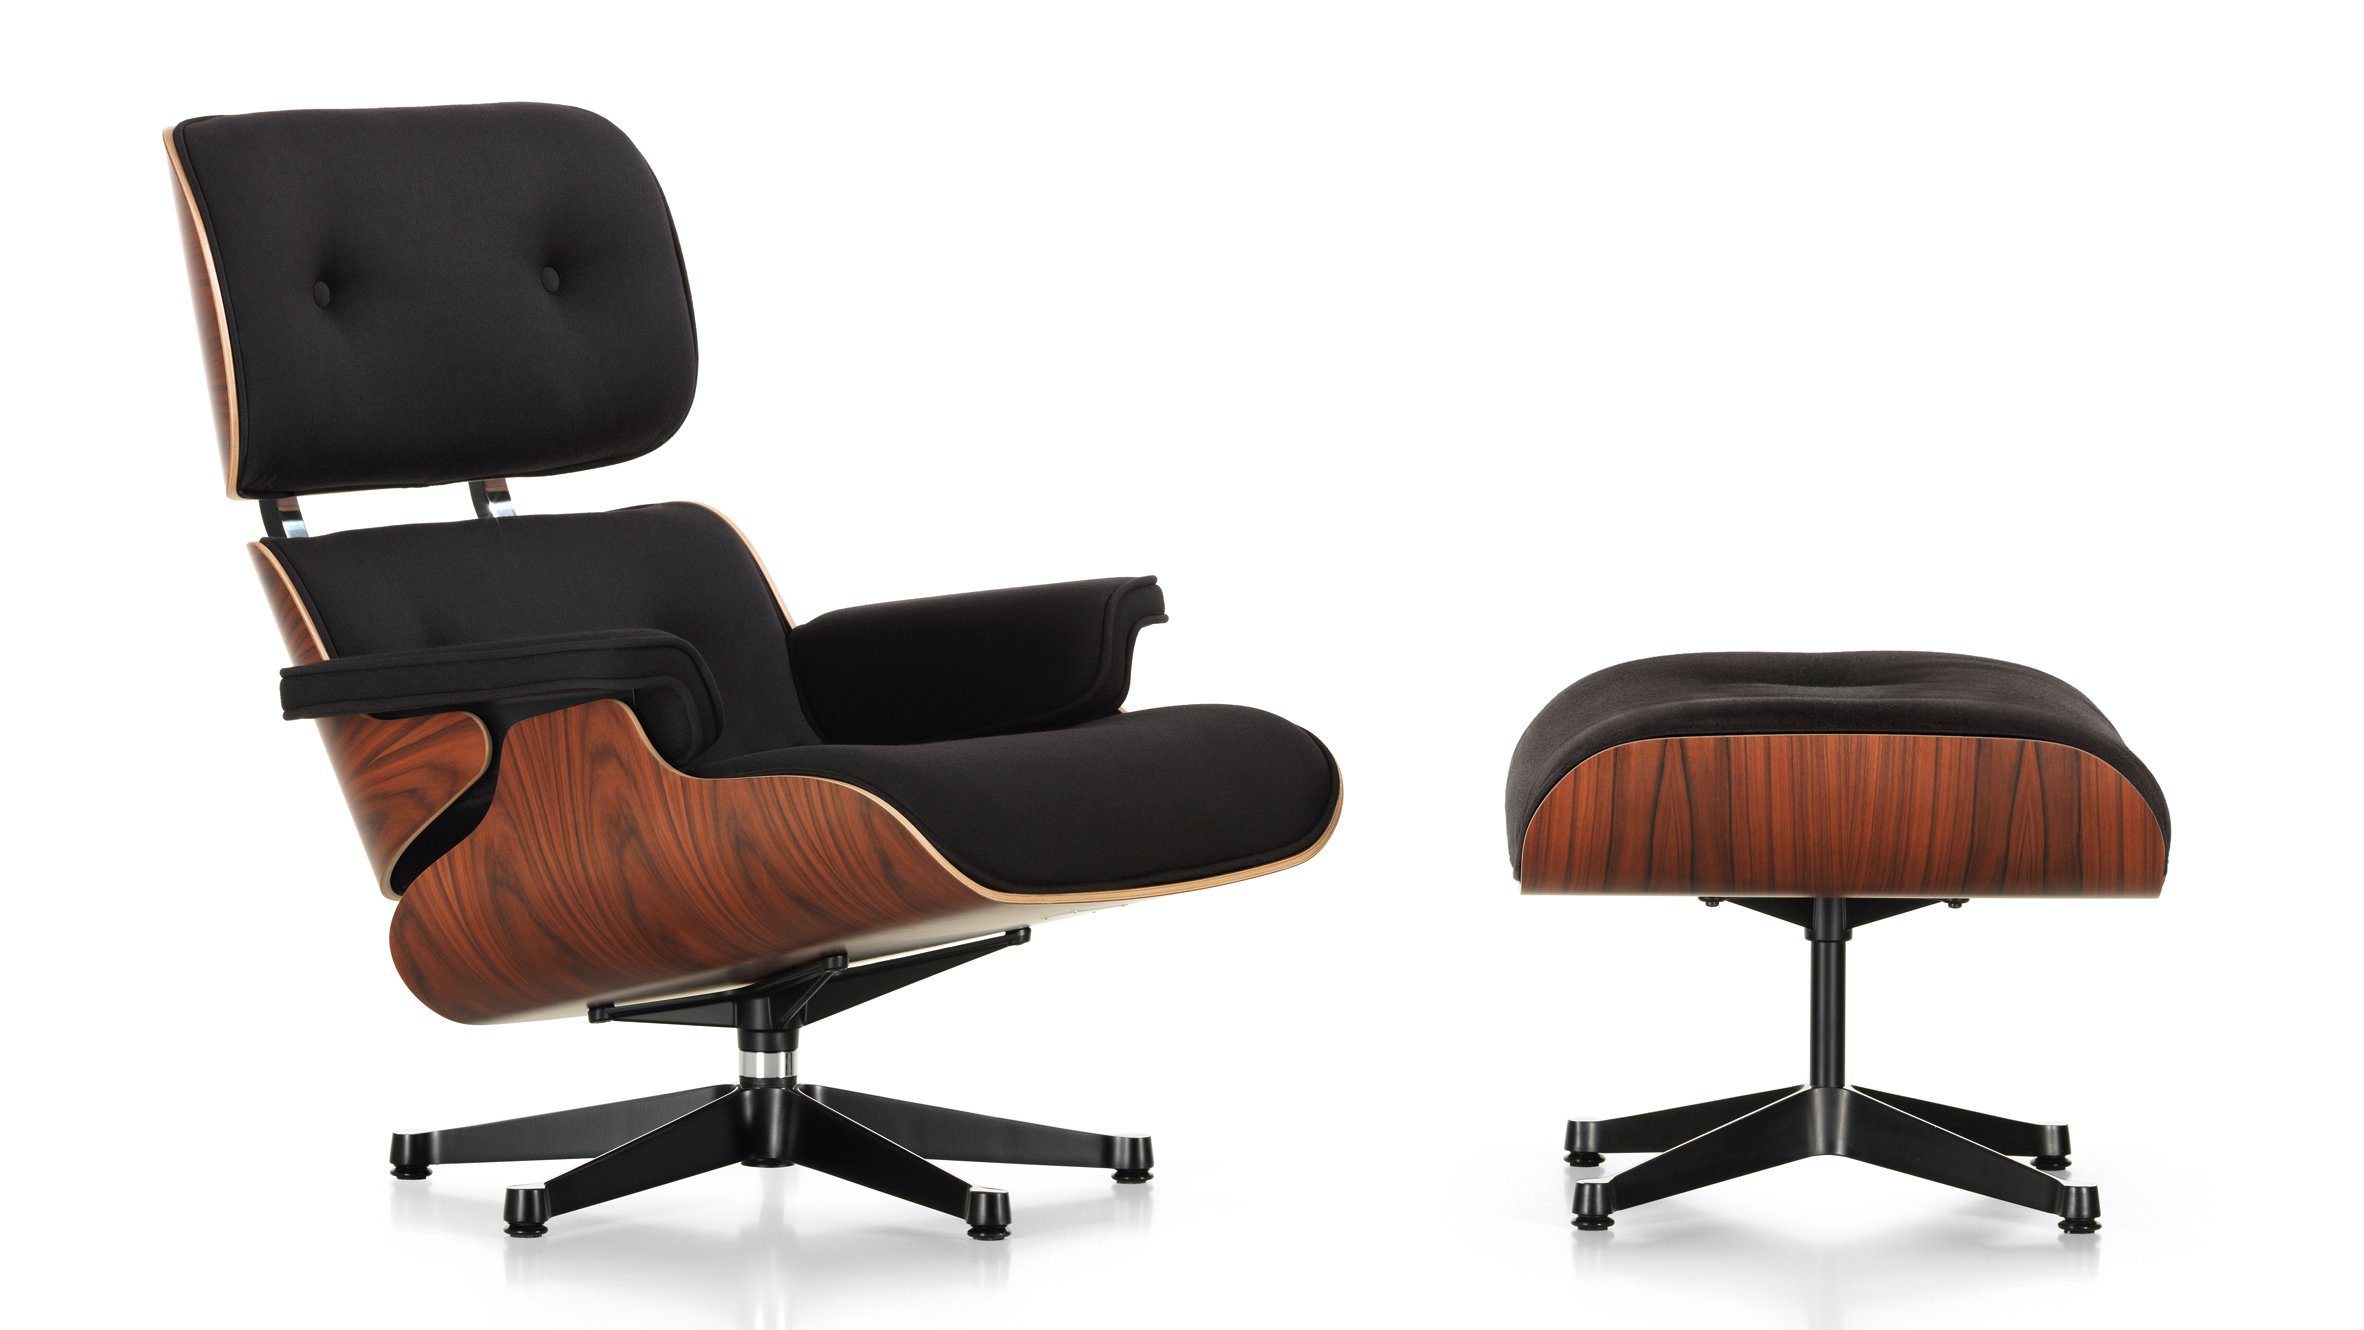 charles-ray-eames-lounge-chair-60th-anniversary-furniture-design-news-trill-upholstery-vitra_dezeen_hero